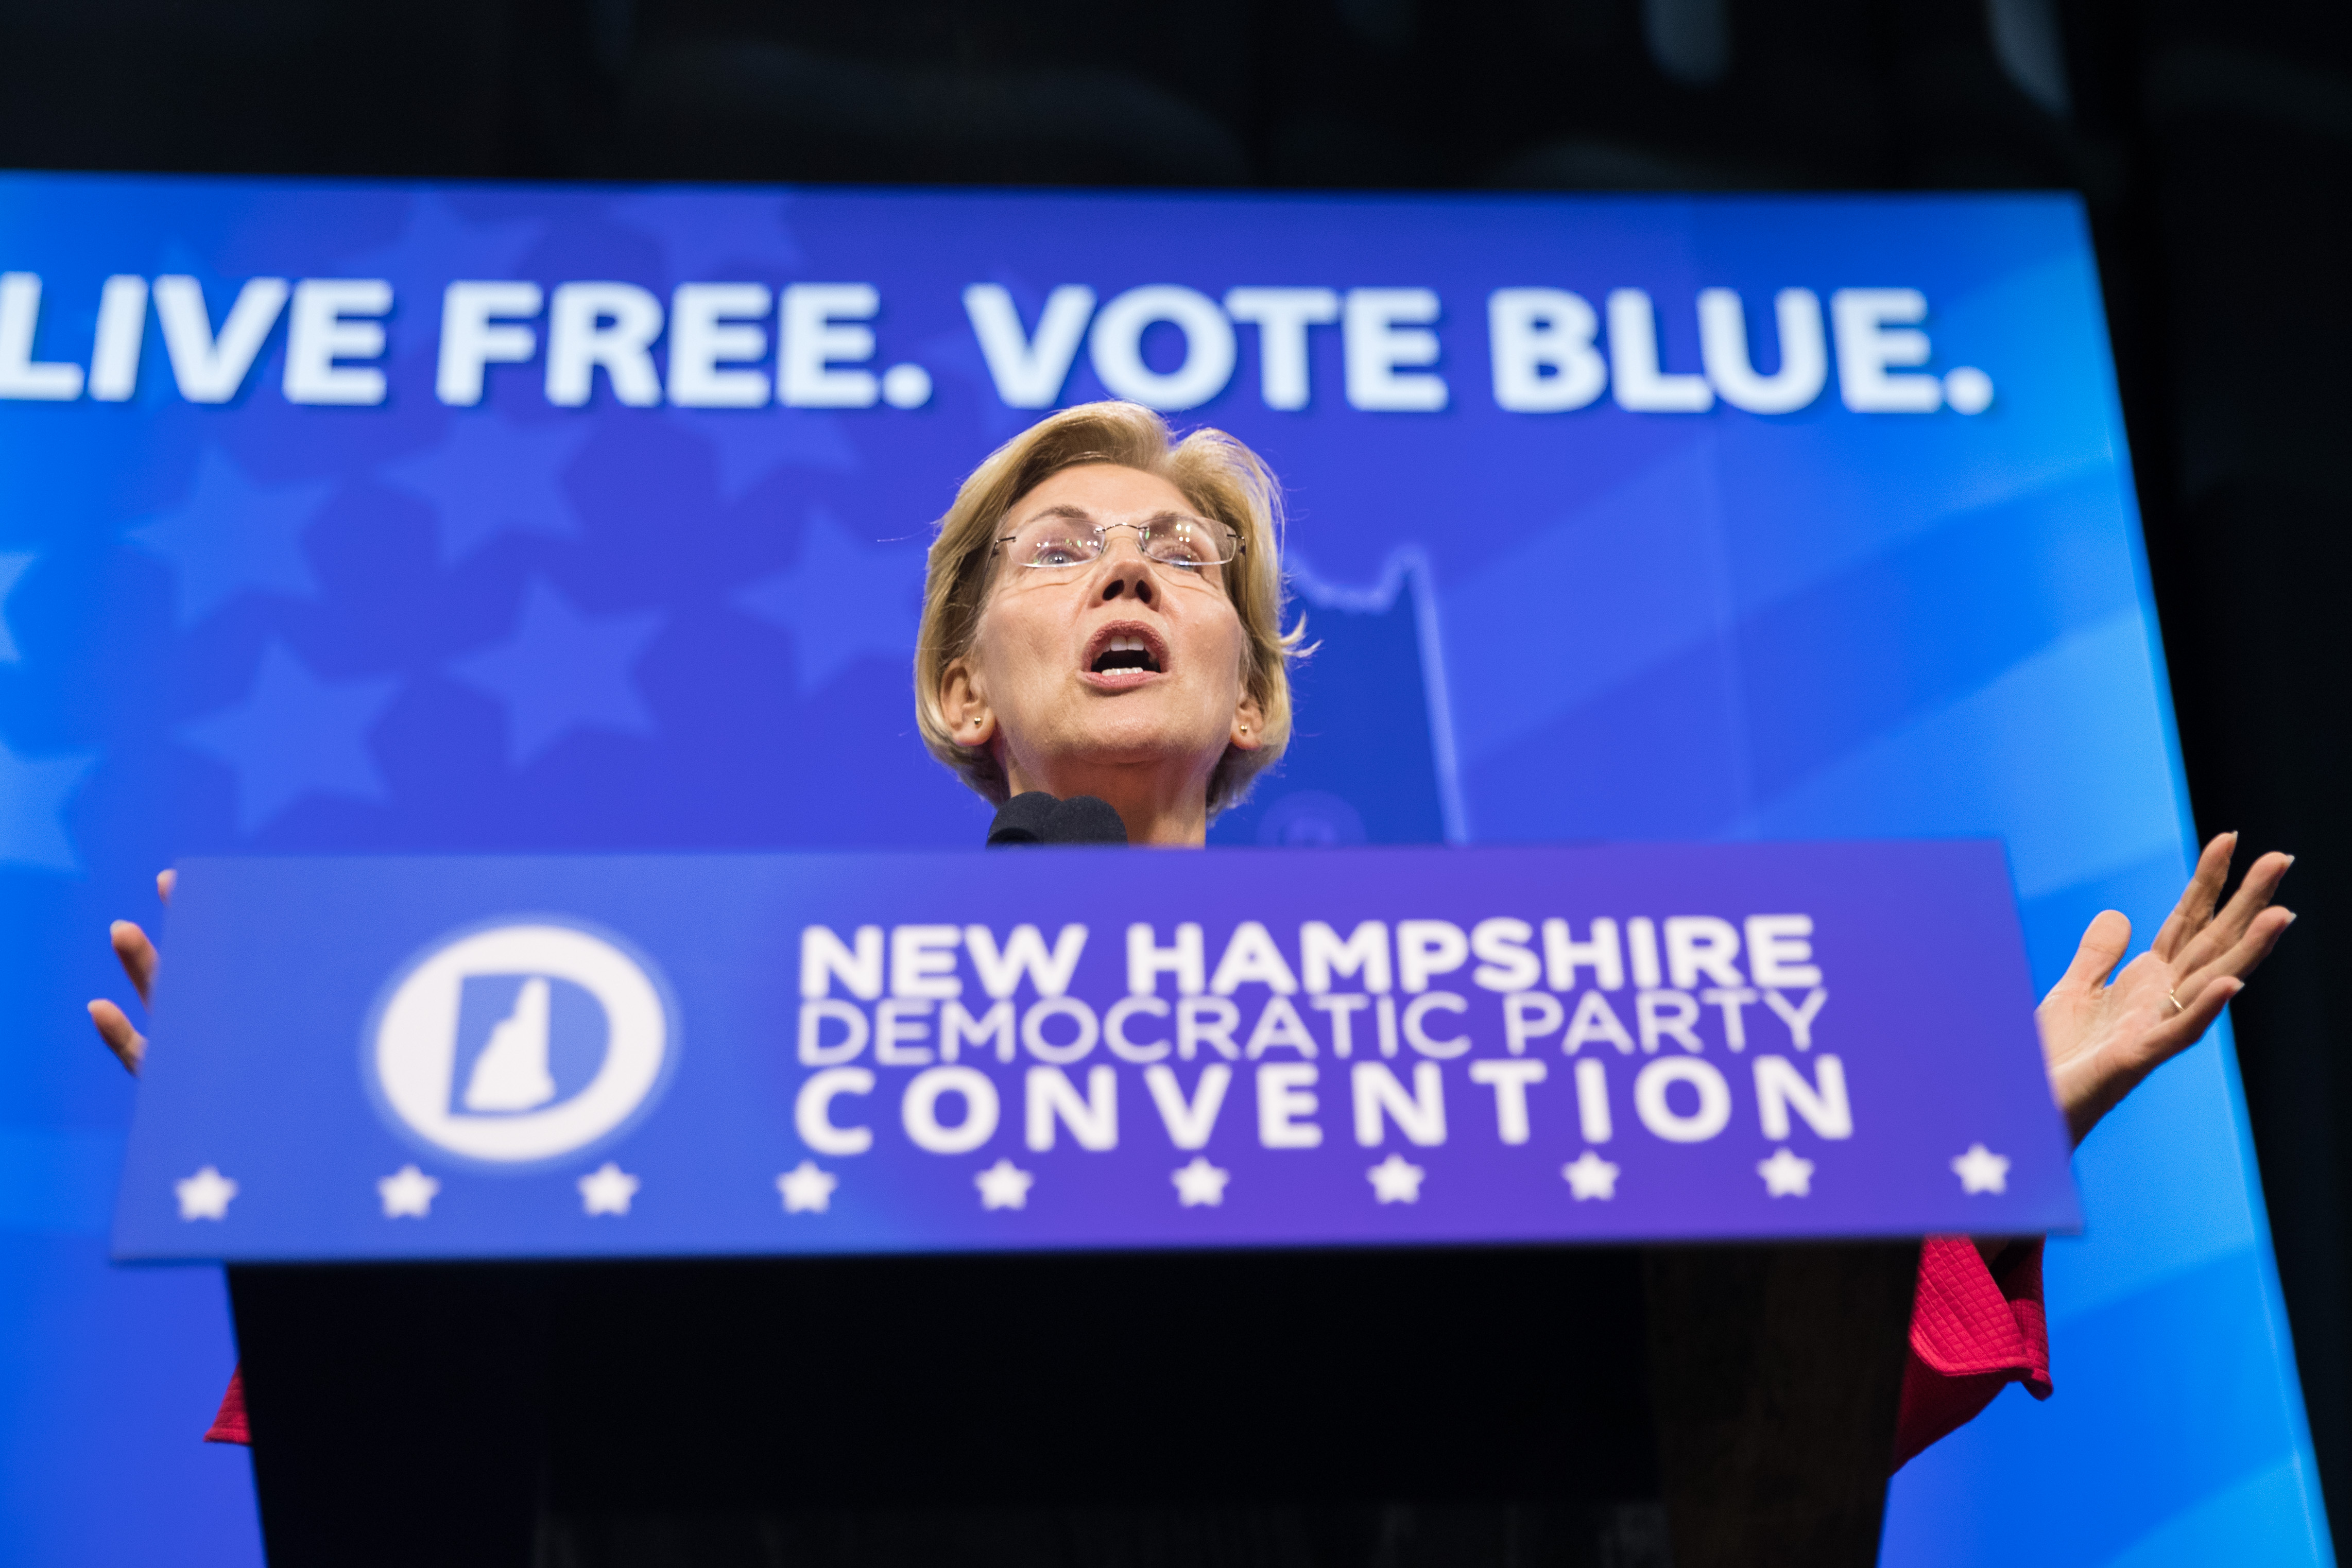 MANCHESTER, NH - SEPTEMBER 07:Democratic presidential candidate, Sen. Elizabeth Warren (D-MA) speaks during the New Hampshire Democratic Party Convention at the SNHU Arenaon September 7, 2019